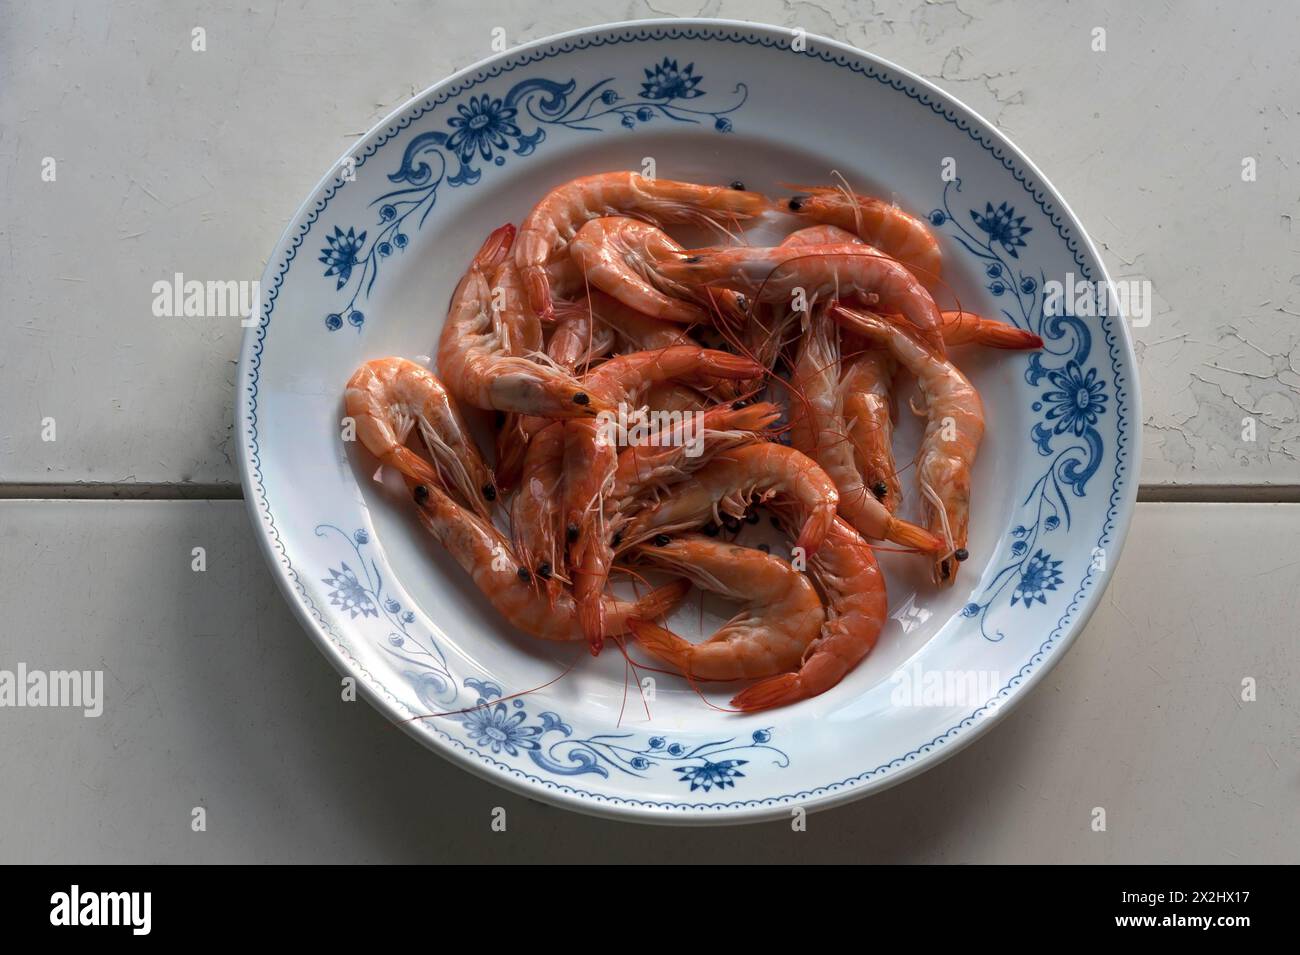 Cooked prawns on a plate, Atlantic coast, France Stock Photo